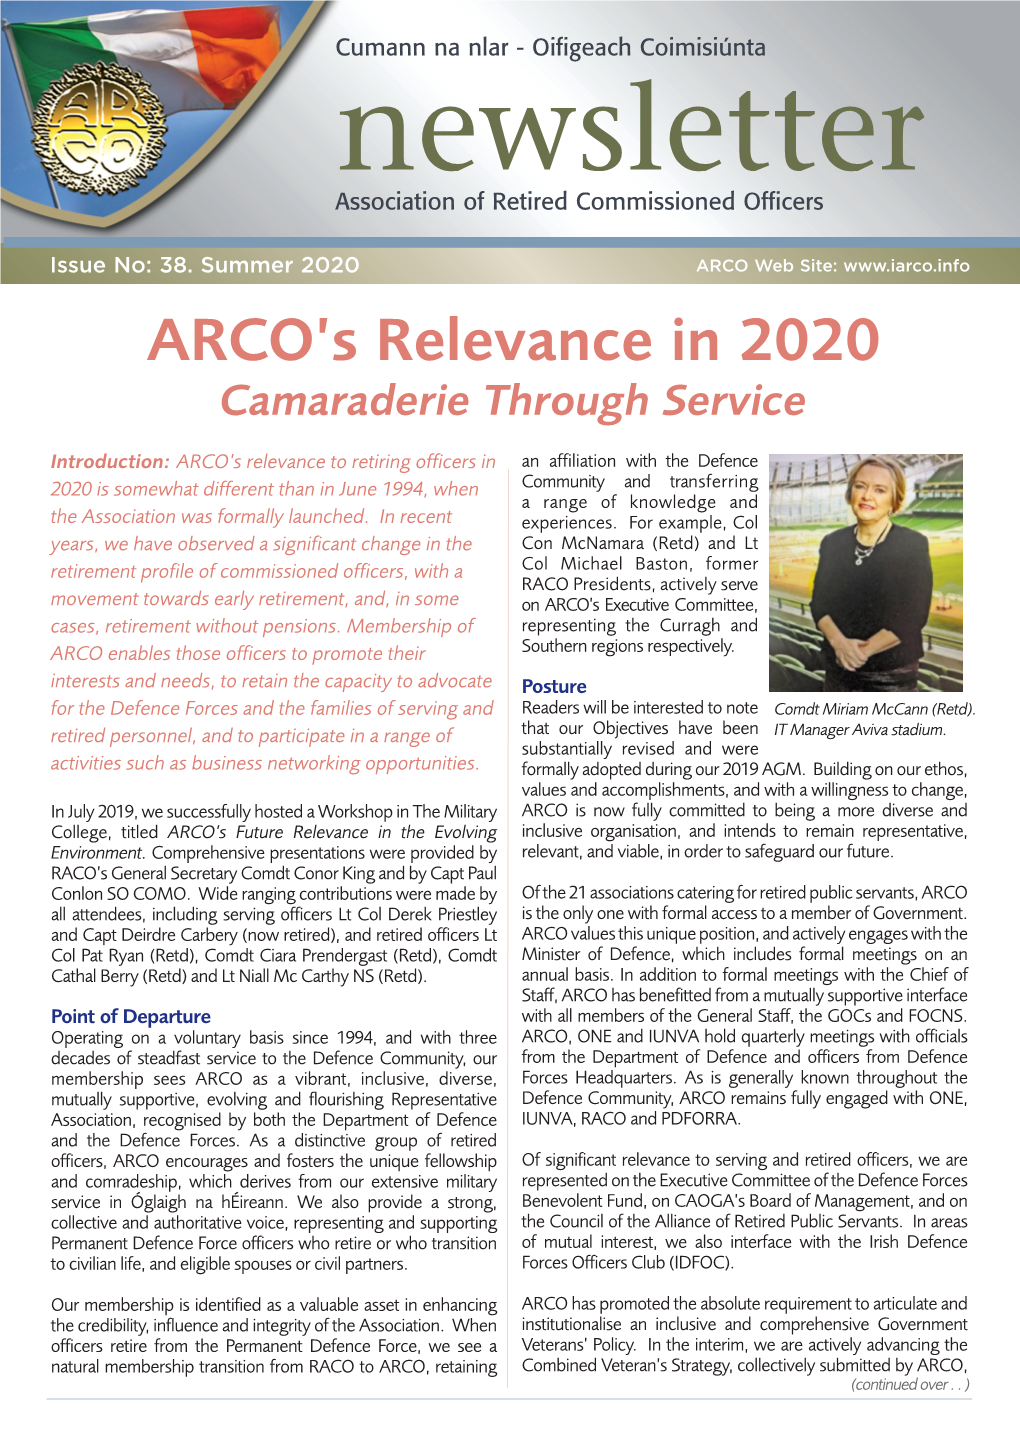 ARCO's Relevance in 2020